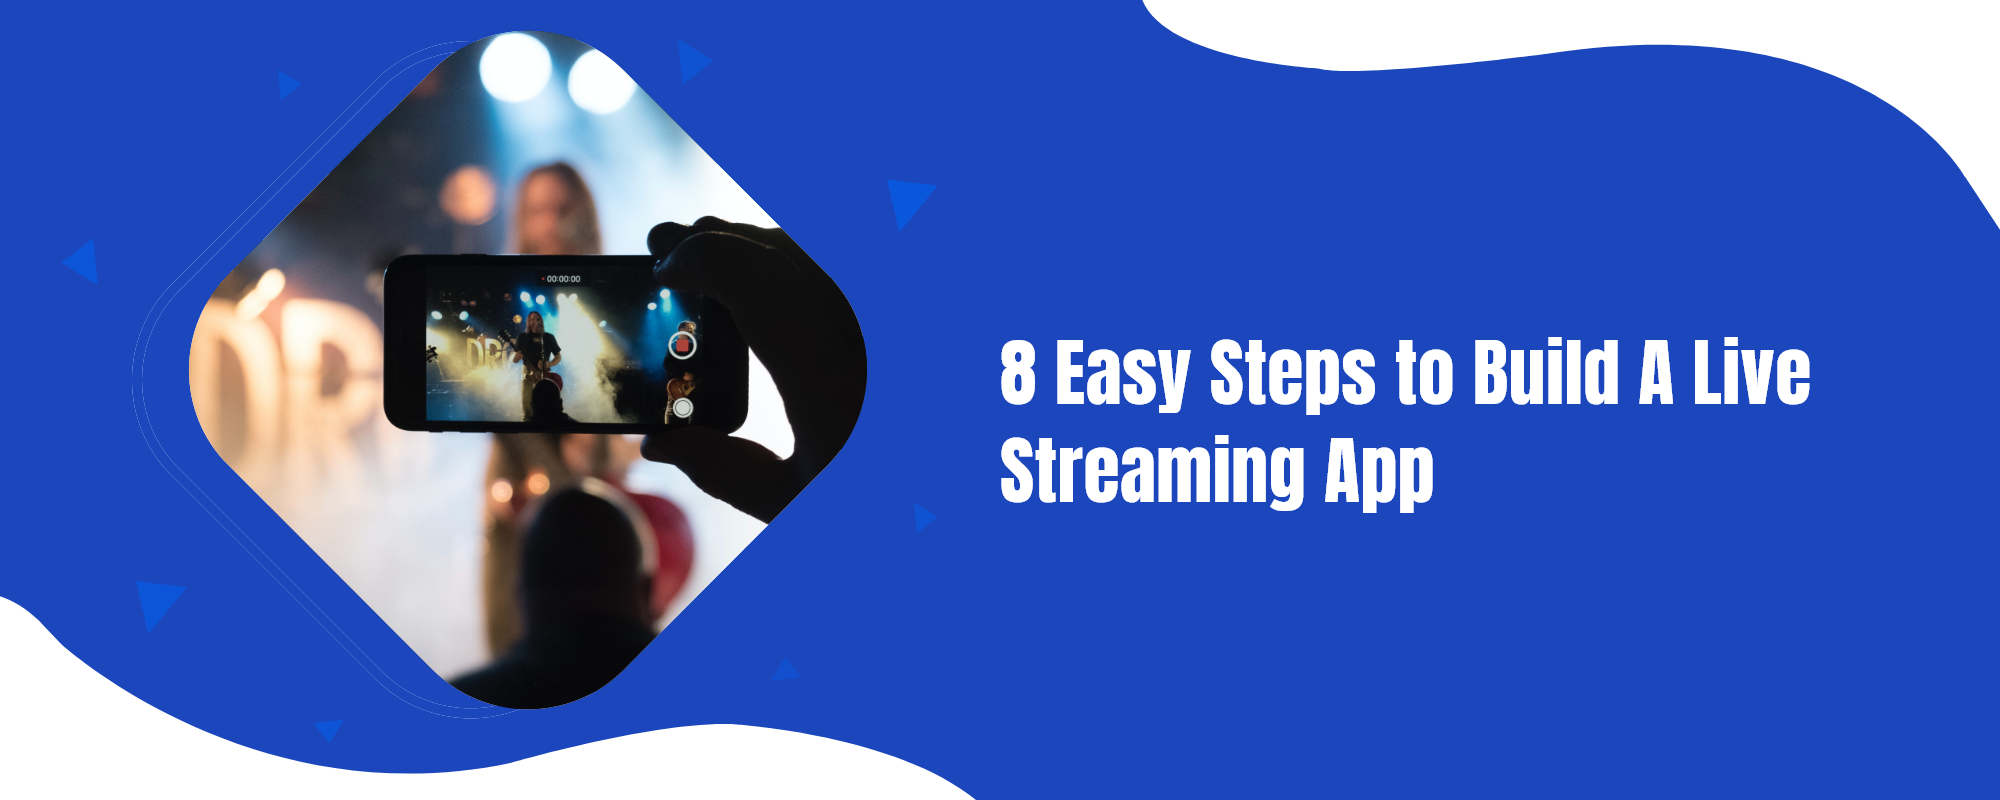 How to build a live streaming app